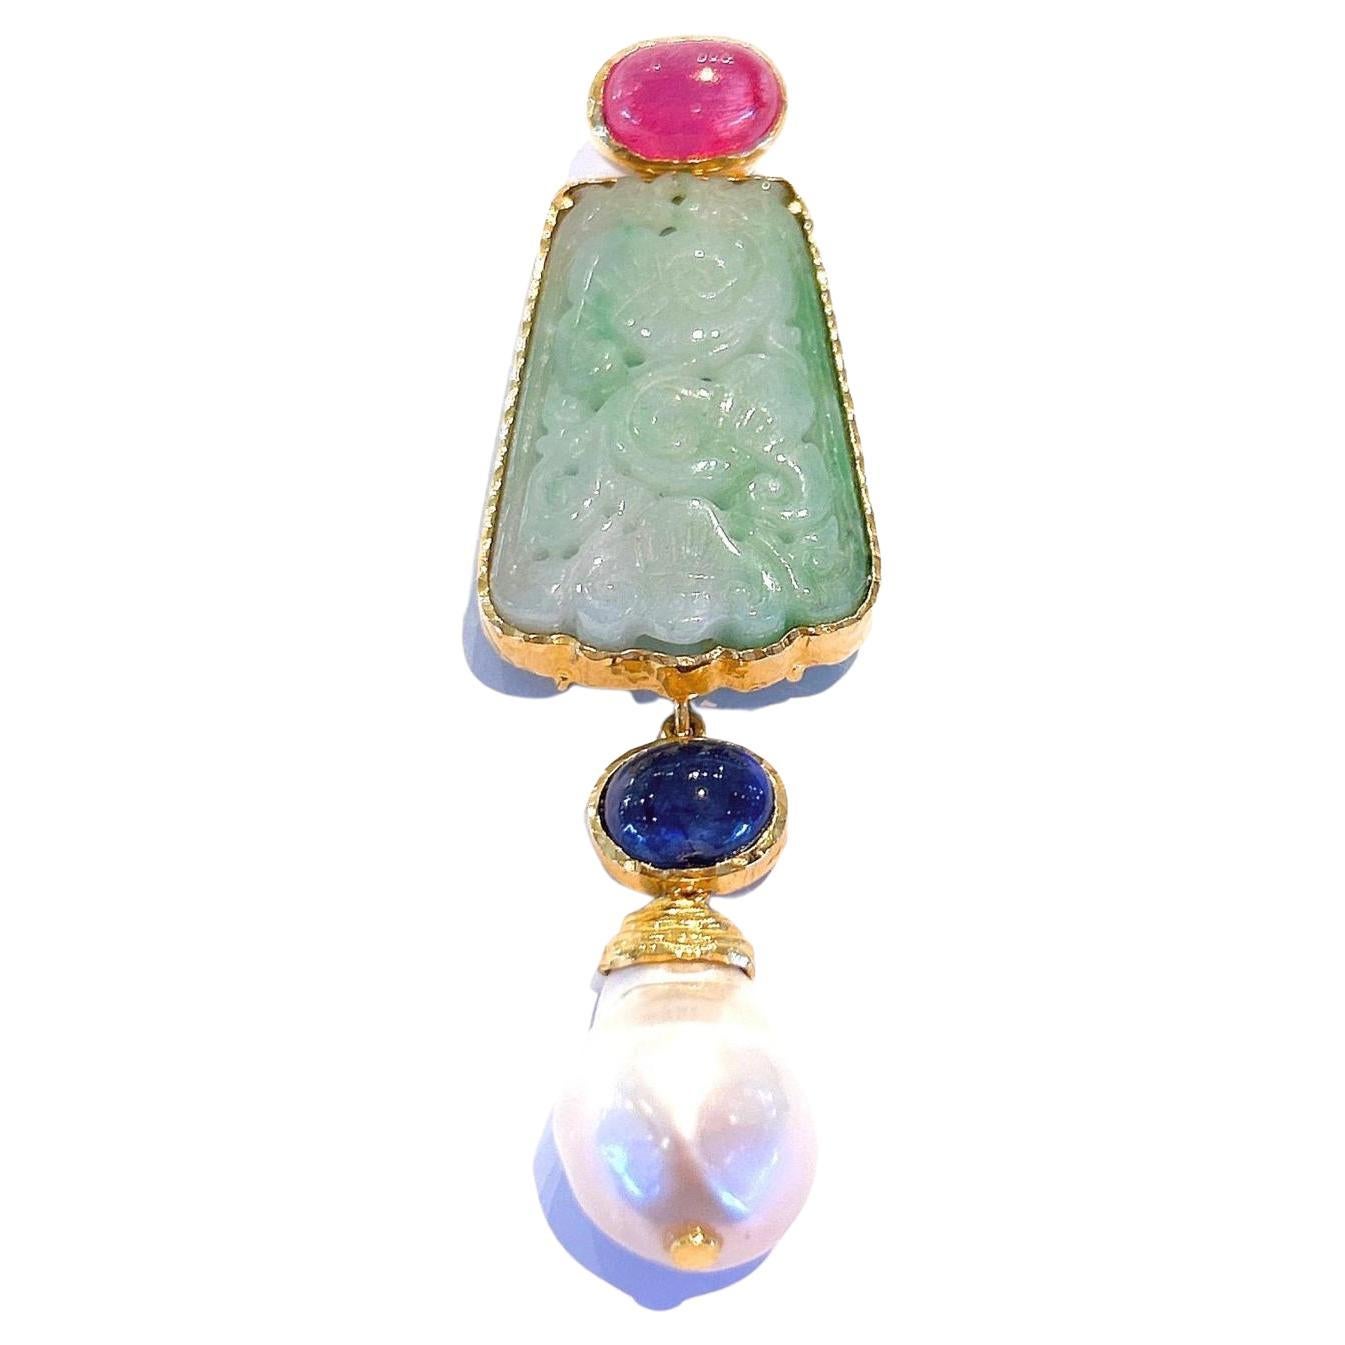 Bochic “Orient’ South Sea Pearl, Sapphire & Jade Pendant Set 18K Gold & Silver
South Sea Natural White Pearls with Pink & Silver tones 
Natural Blue Sapphire from Sri Lanka 
8 carats 
Cabochon Shapes and Round Brilliant Shapes 
Green Carved Vintage